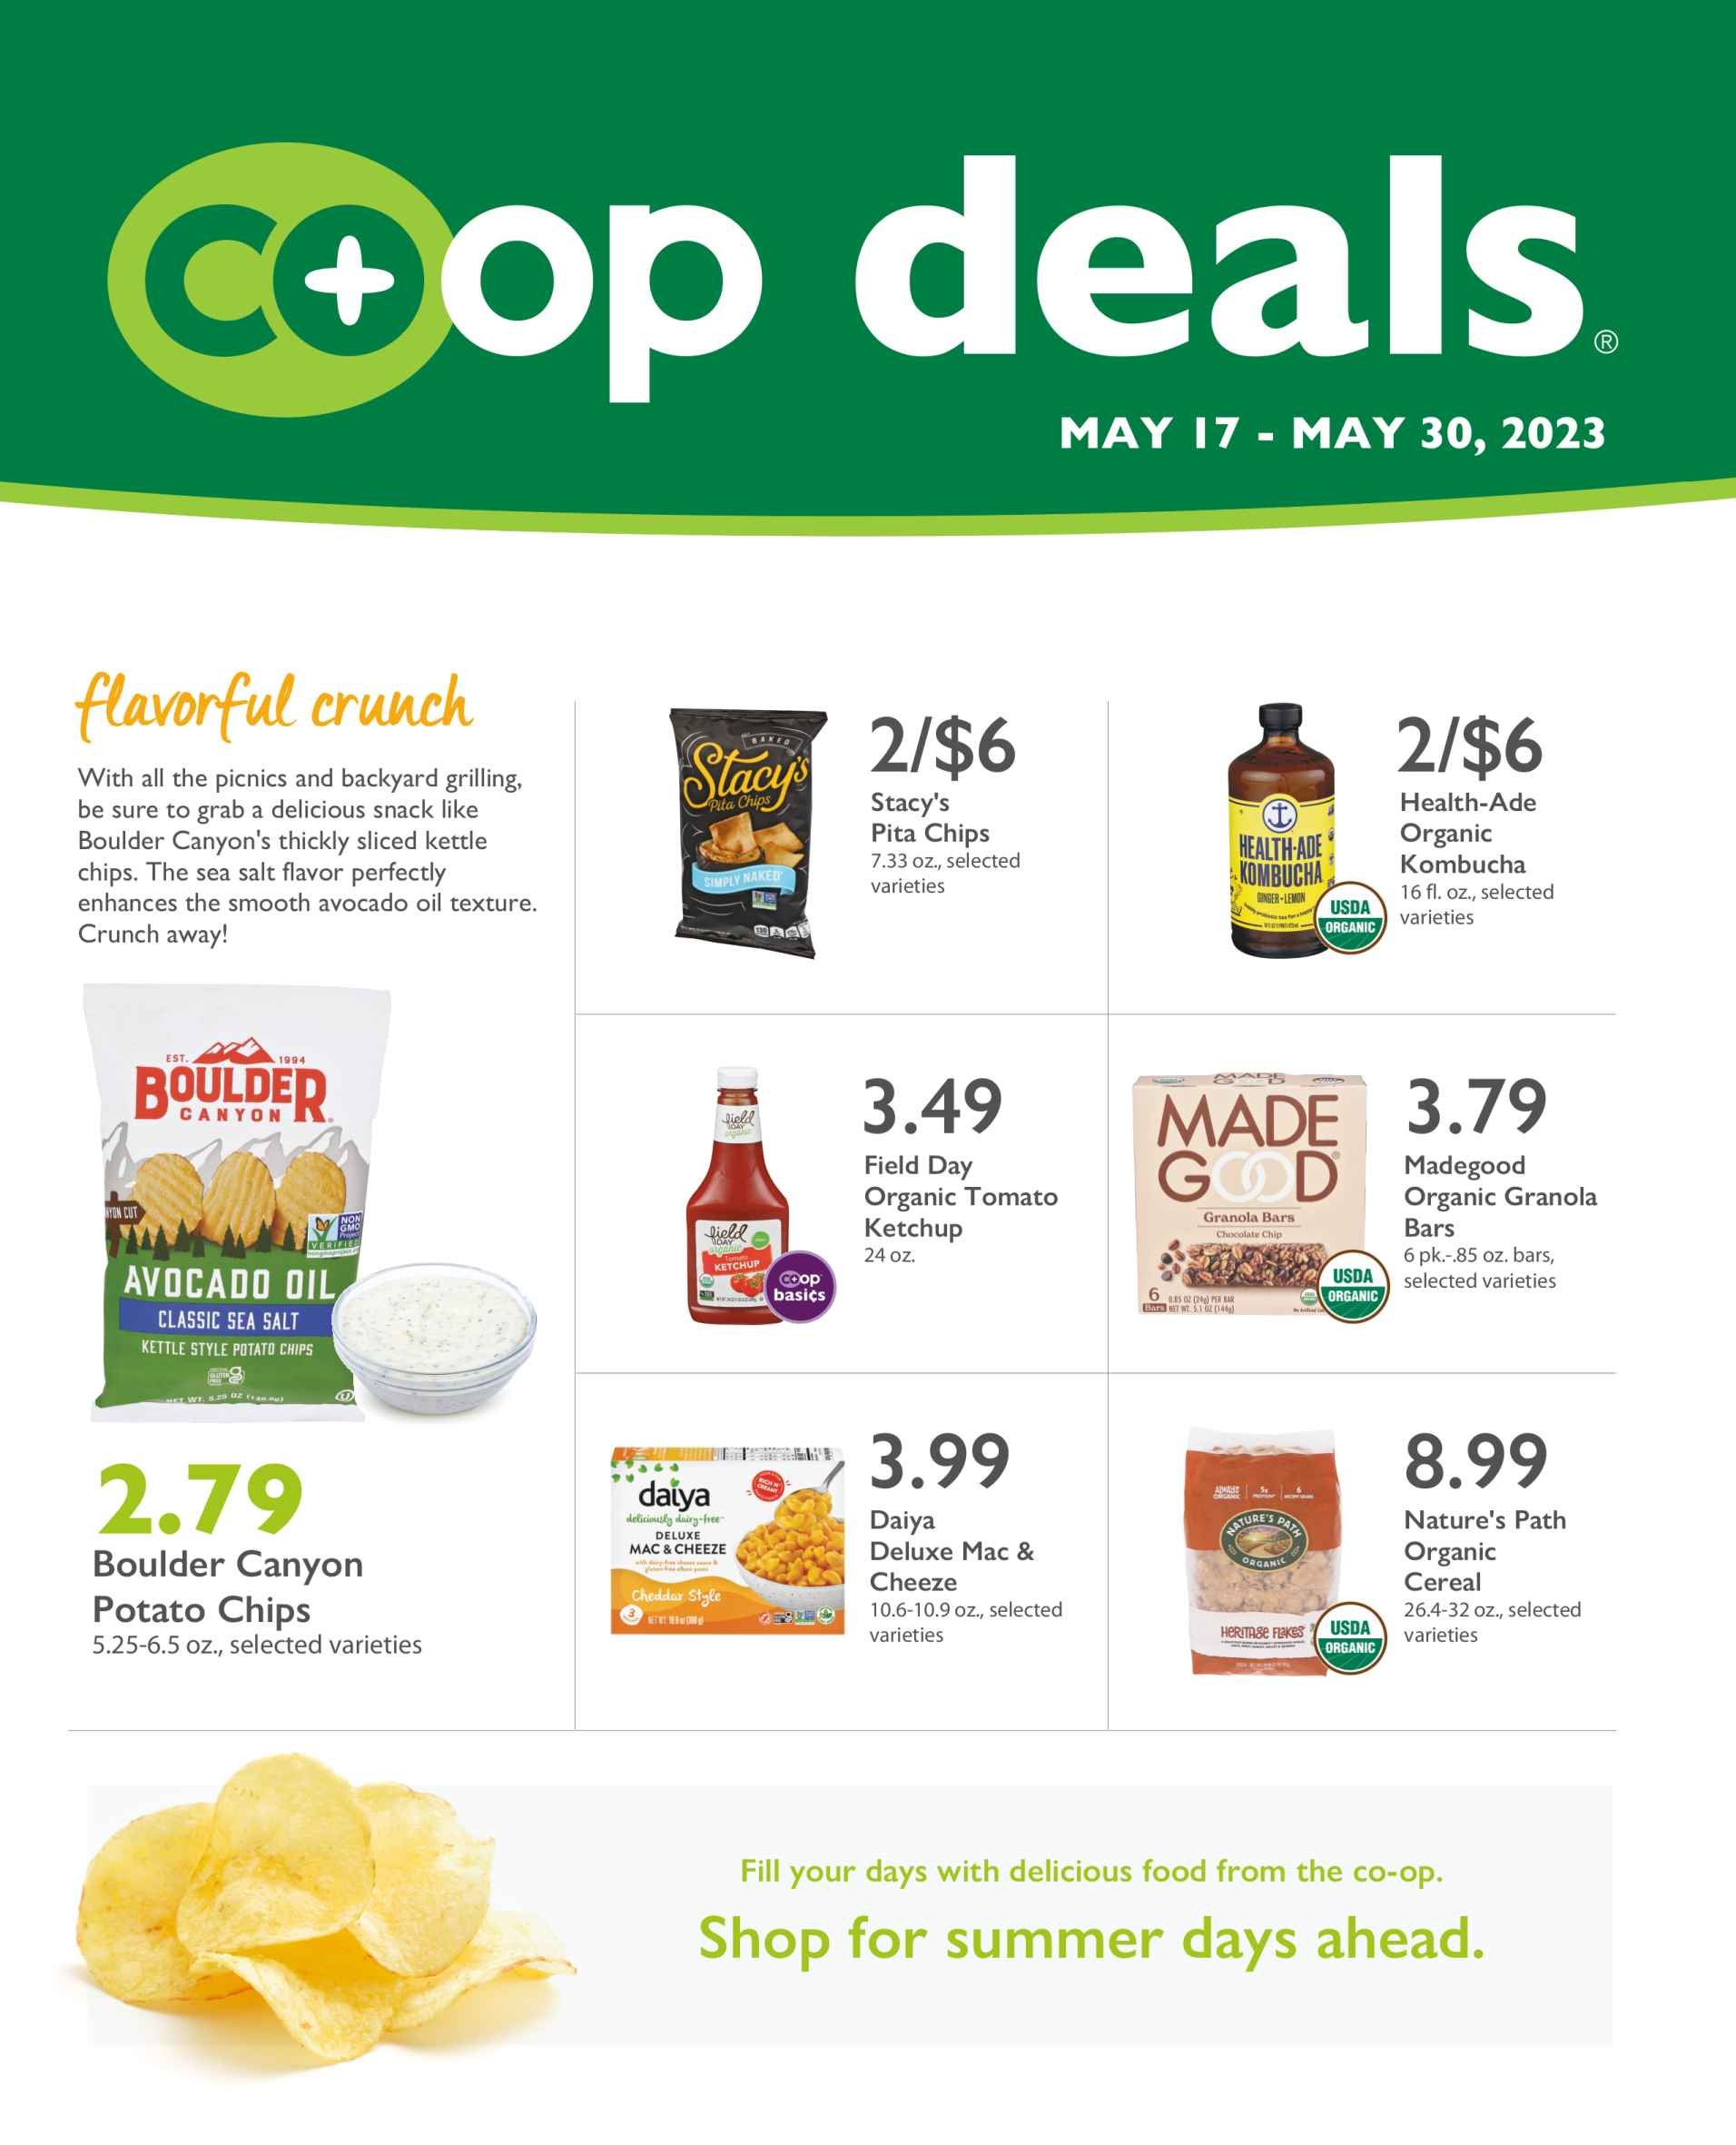 Co+op_Deals_May_2023_Flyer_West_B_Page (1).jpg